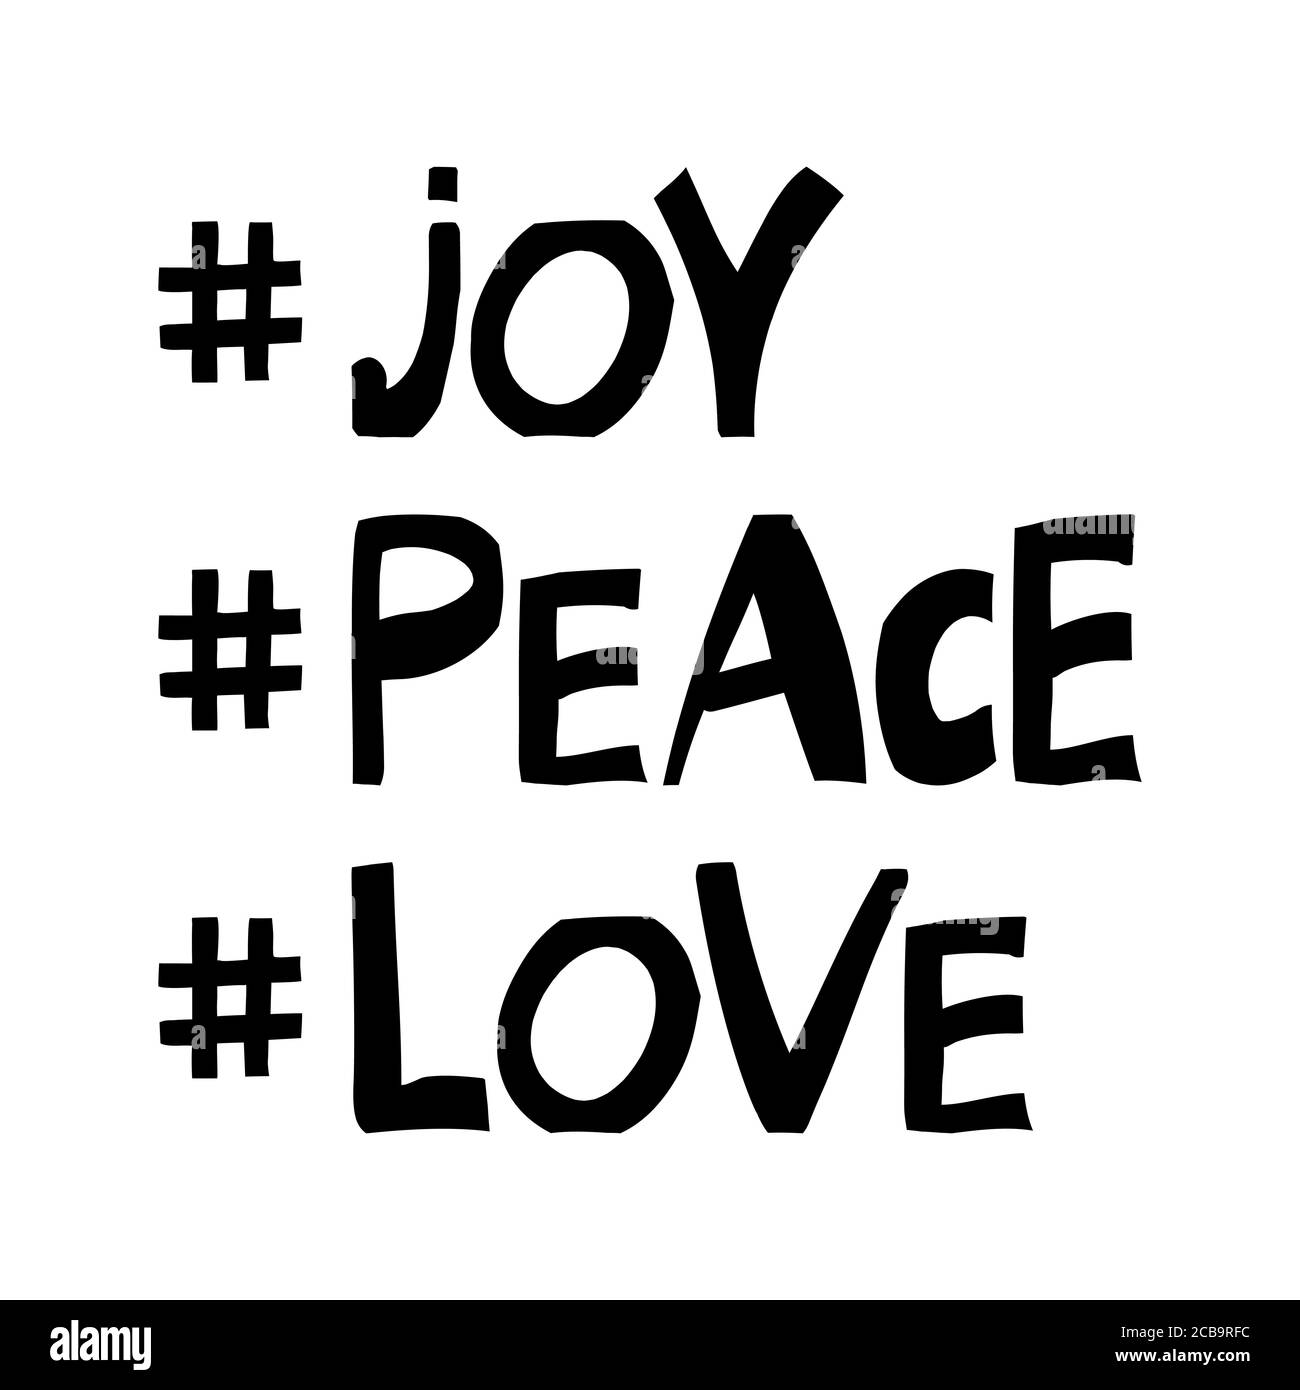 Joy, peace, love. Winter holidays quote. Cute hand drawn lettering in modern scandinavian style. Isolated on white background. Vector stock Stock Vector